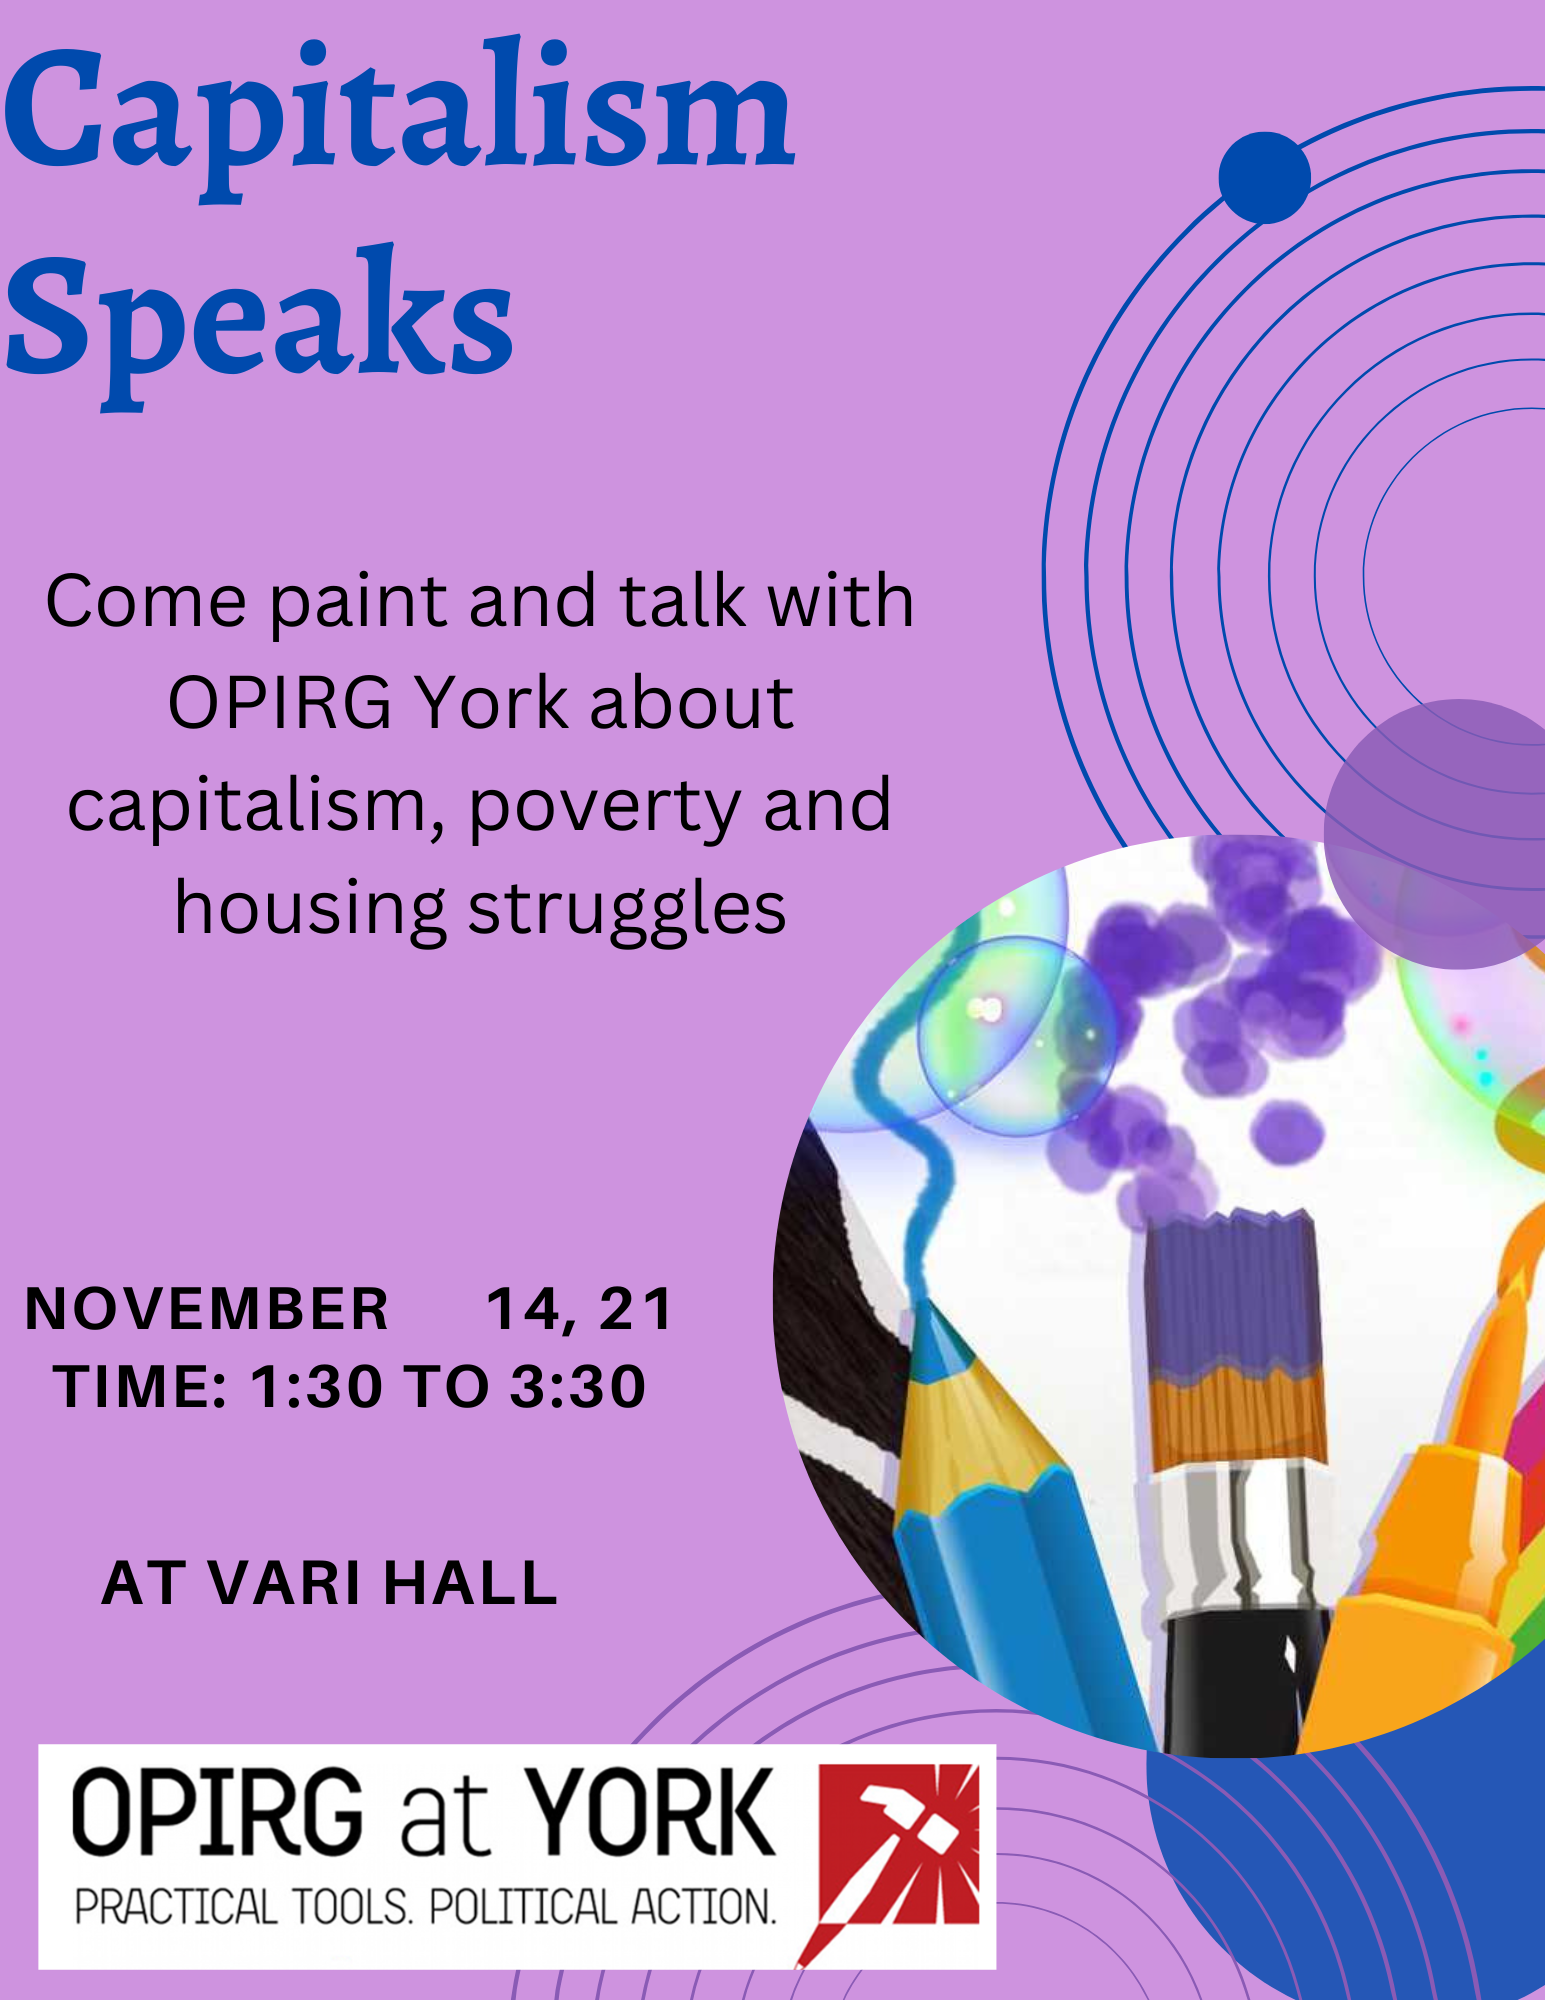 Purple background with blue and black text: Capitalism Speaks/ Come paint and talk with OPIRG York about capitalism, poverty and housing struggles/ November 14, 21/ Time: 1:30 to 3:30/ at Vari Hall/ in the bottom right corner is the OPIRG York logo. To the left are some concentric circles with a pencil crayon and paint brushes.